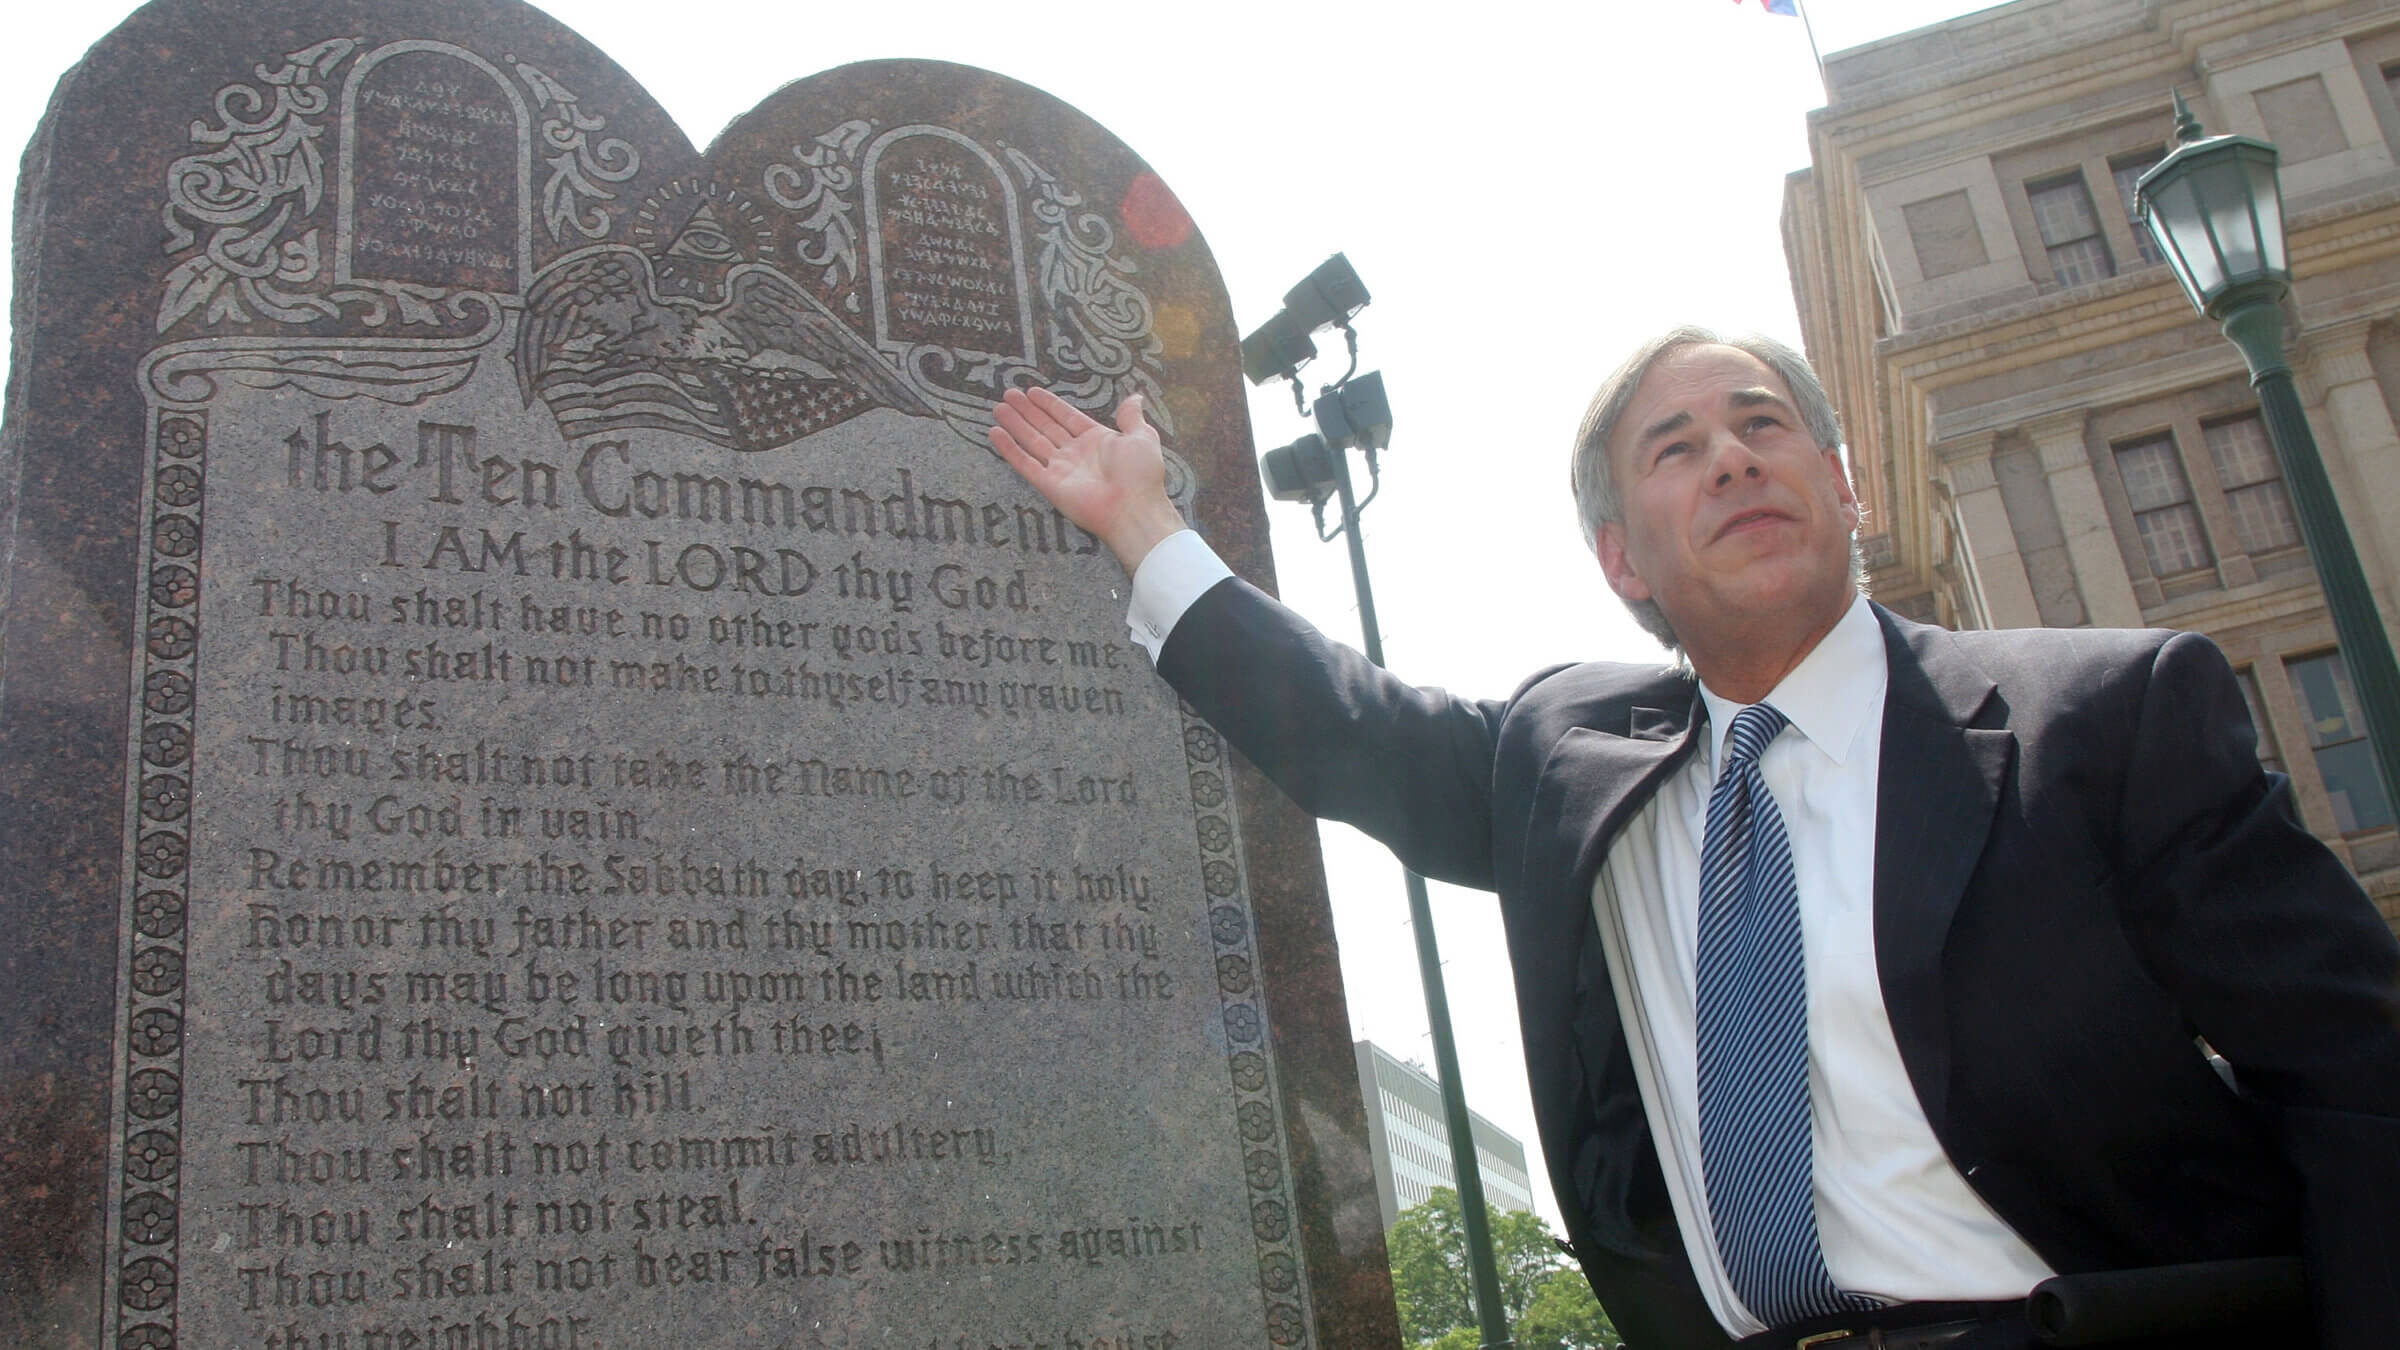 Texas Attorney General Greg Abbott celebrates the U.S. Supreme Court decision that allows a Ten Commandments monument to stand outside the Texas State Capitol, June 27, 2005. His party ascribes to a vision of the country as an ethno-nationalist Christian theocracy.